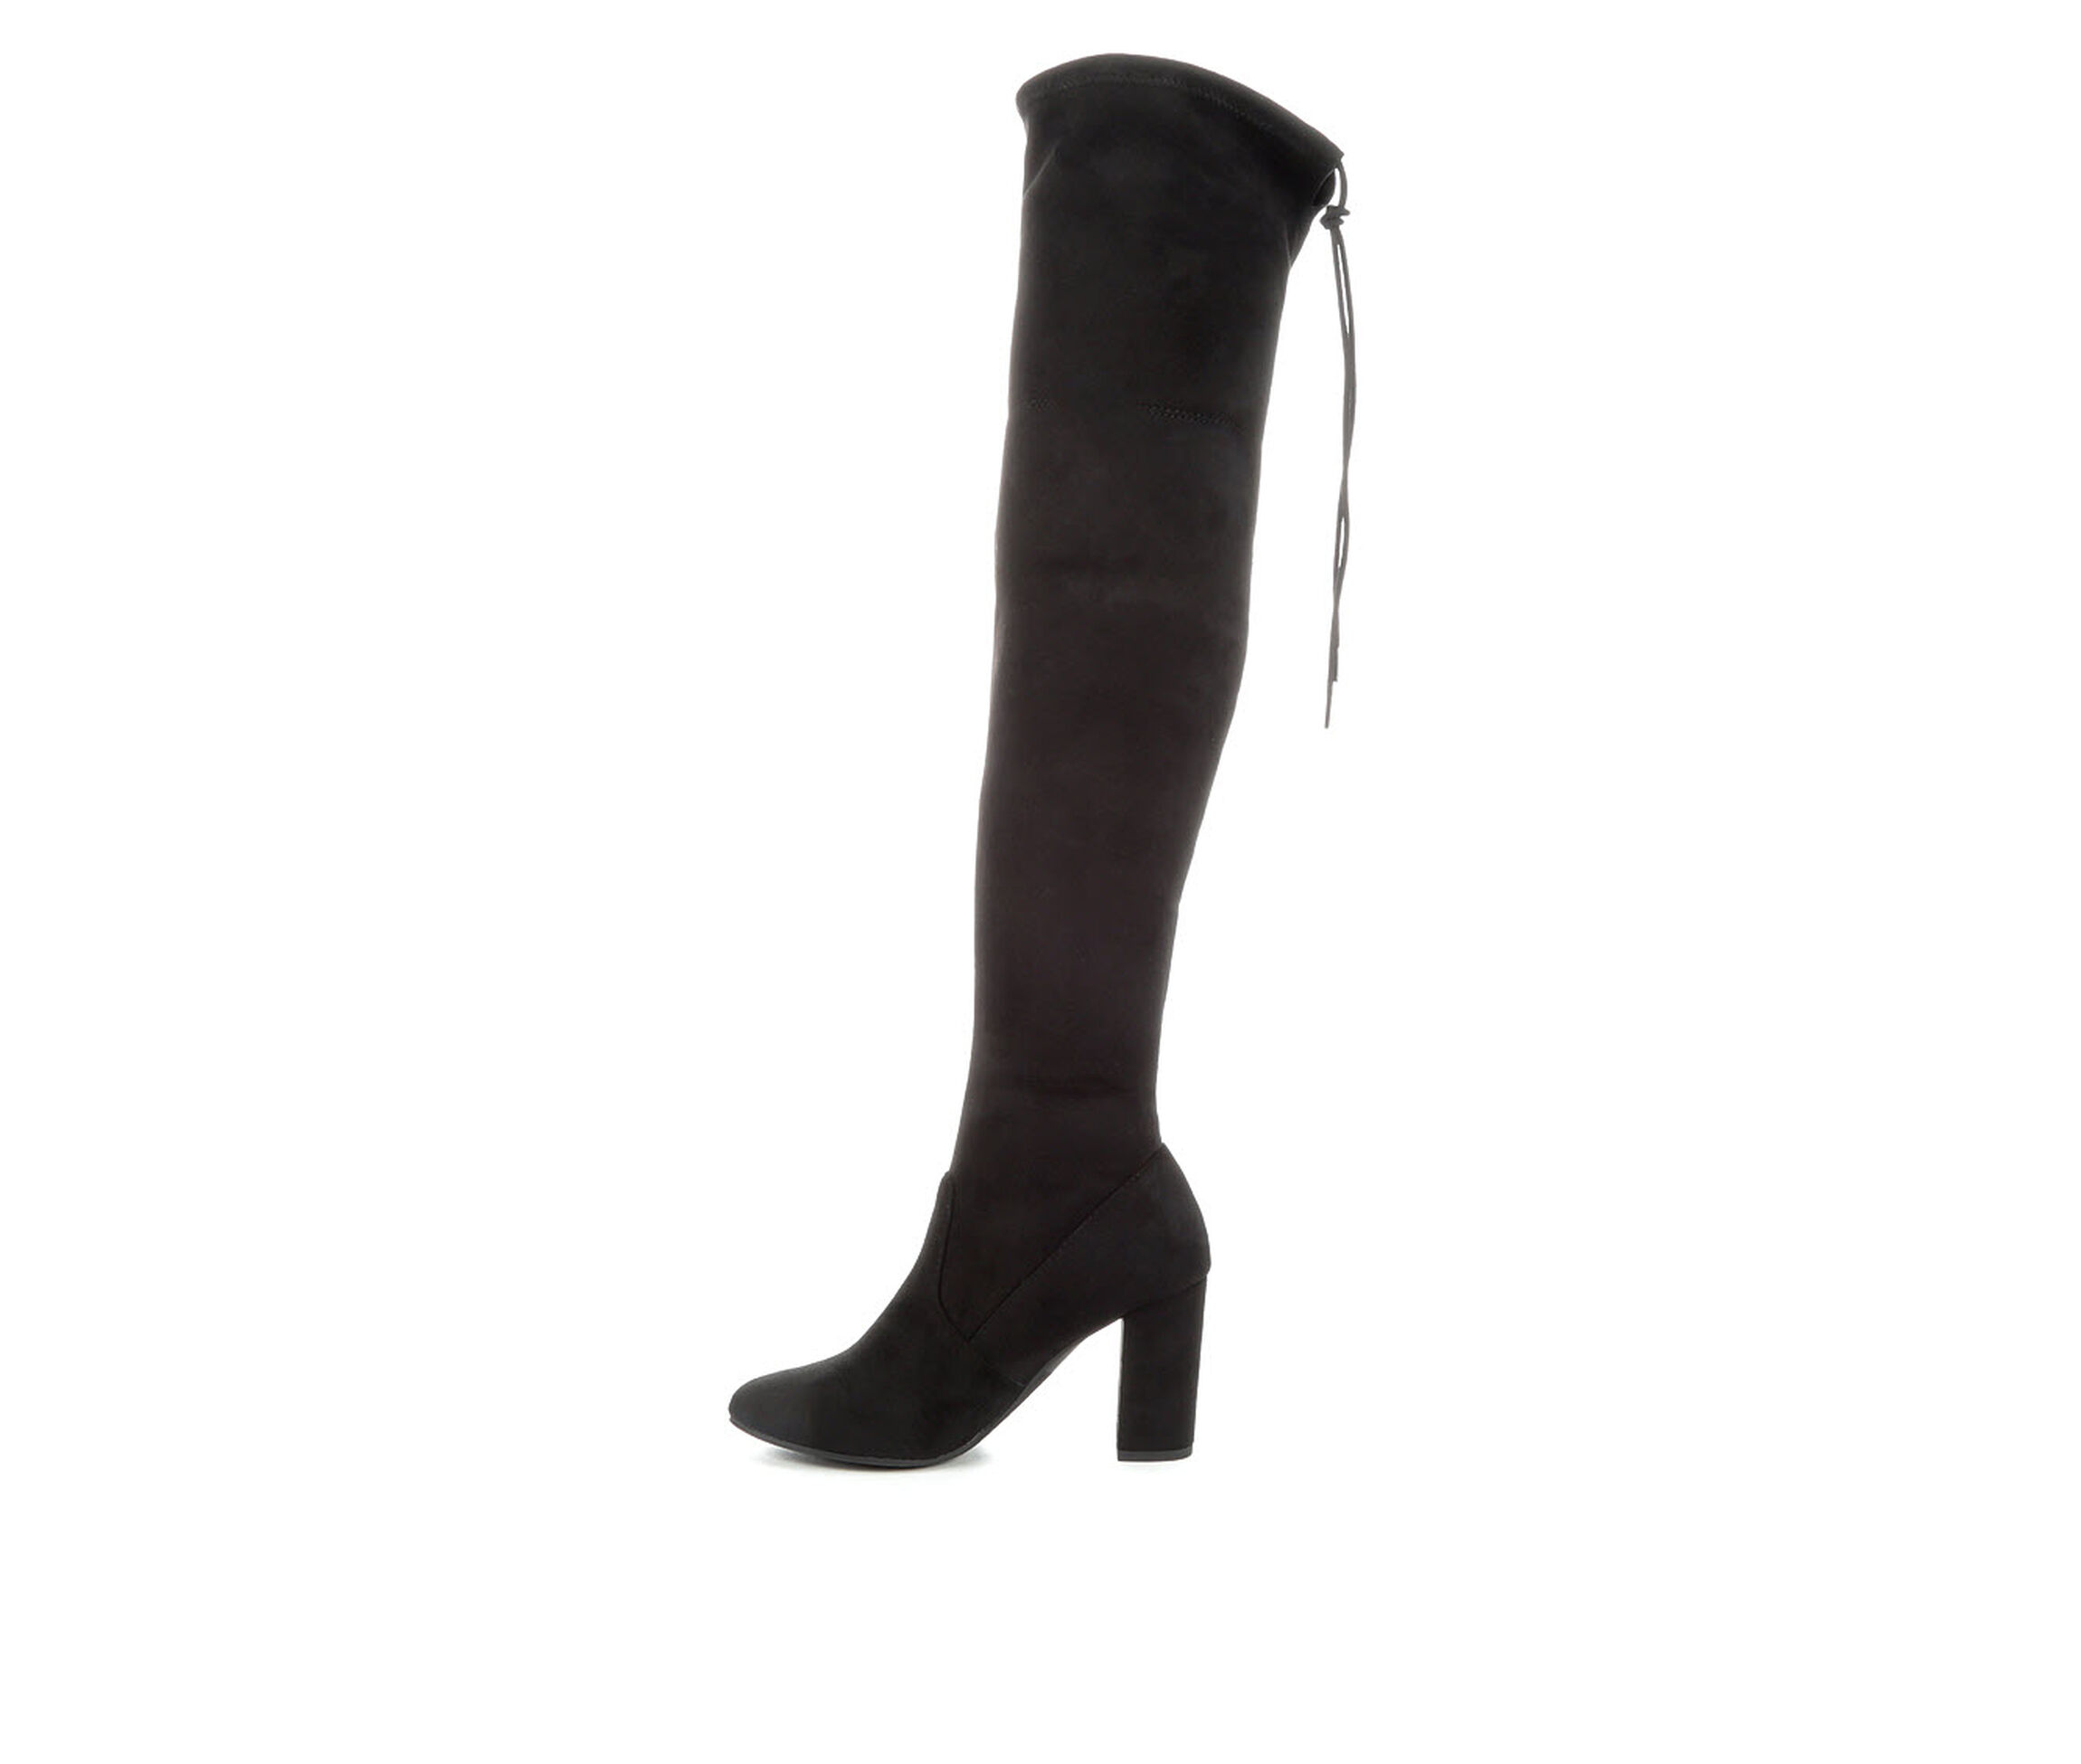 Women's Over-The-Knee Boots | Shoe Carnival